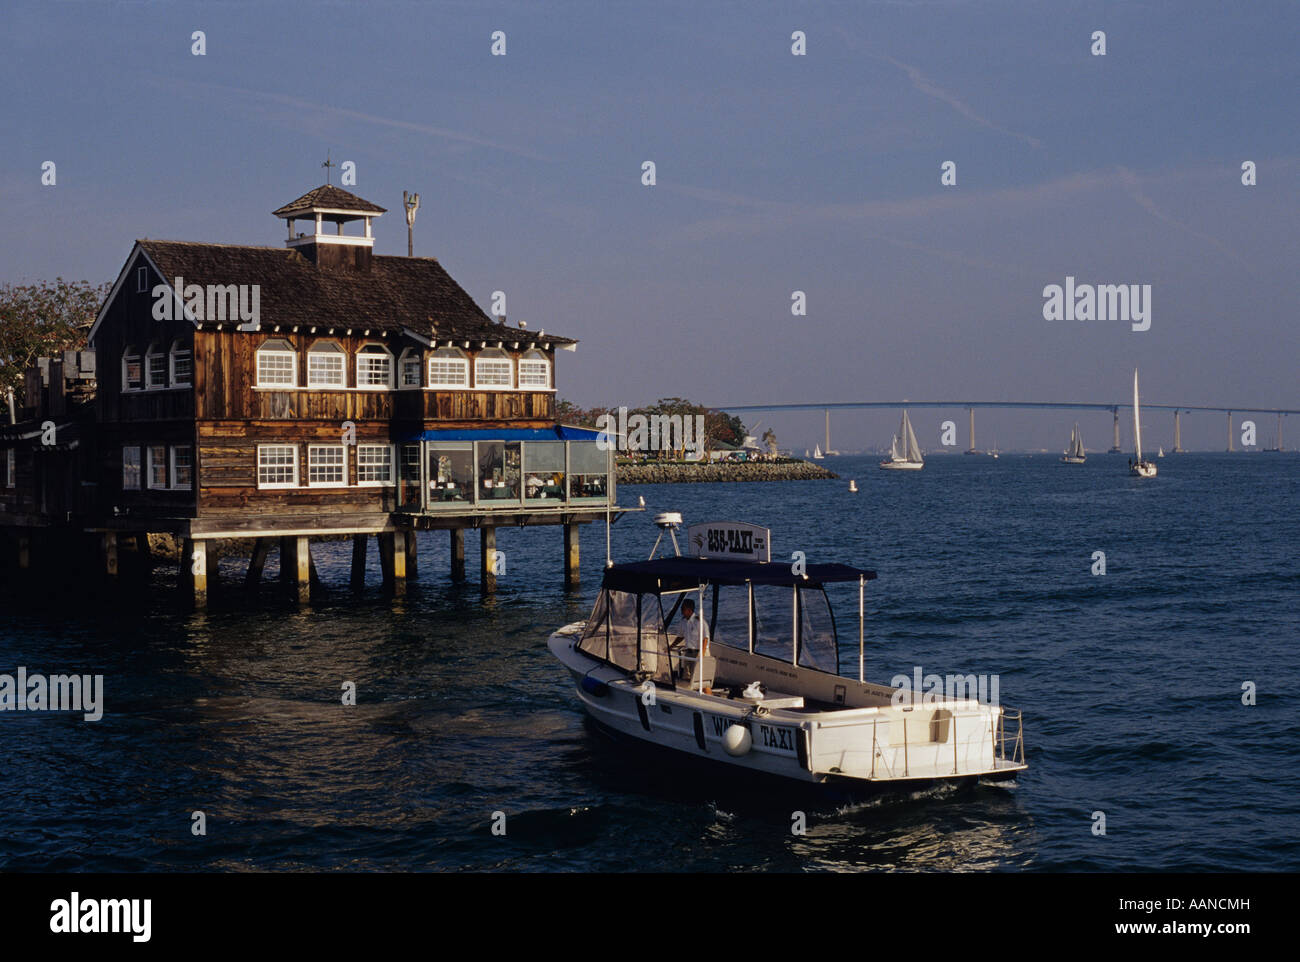 Retro Image SeaPort Village restaurant with water taxi along San Diego bay with sailboats in the background San Diego California USA Stock Photo